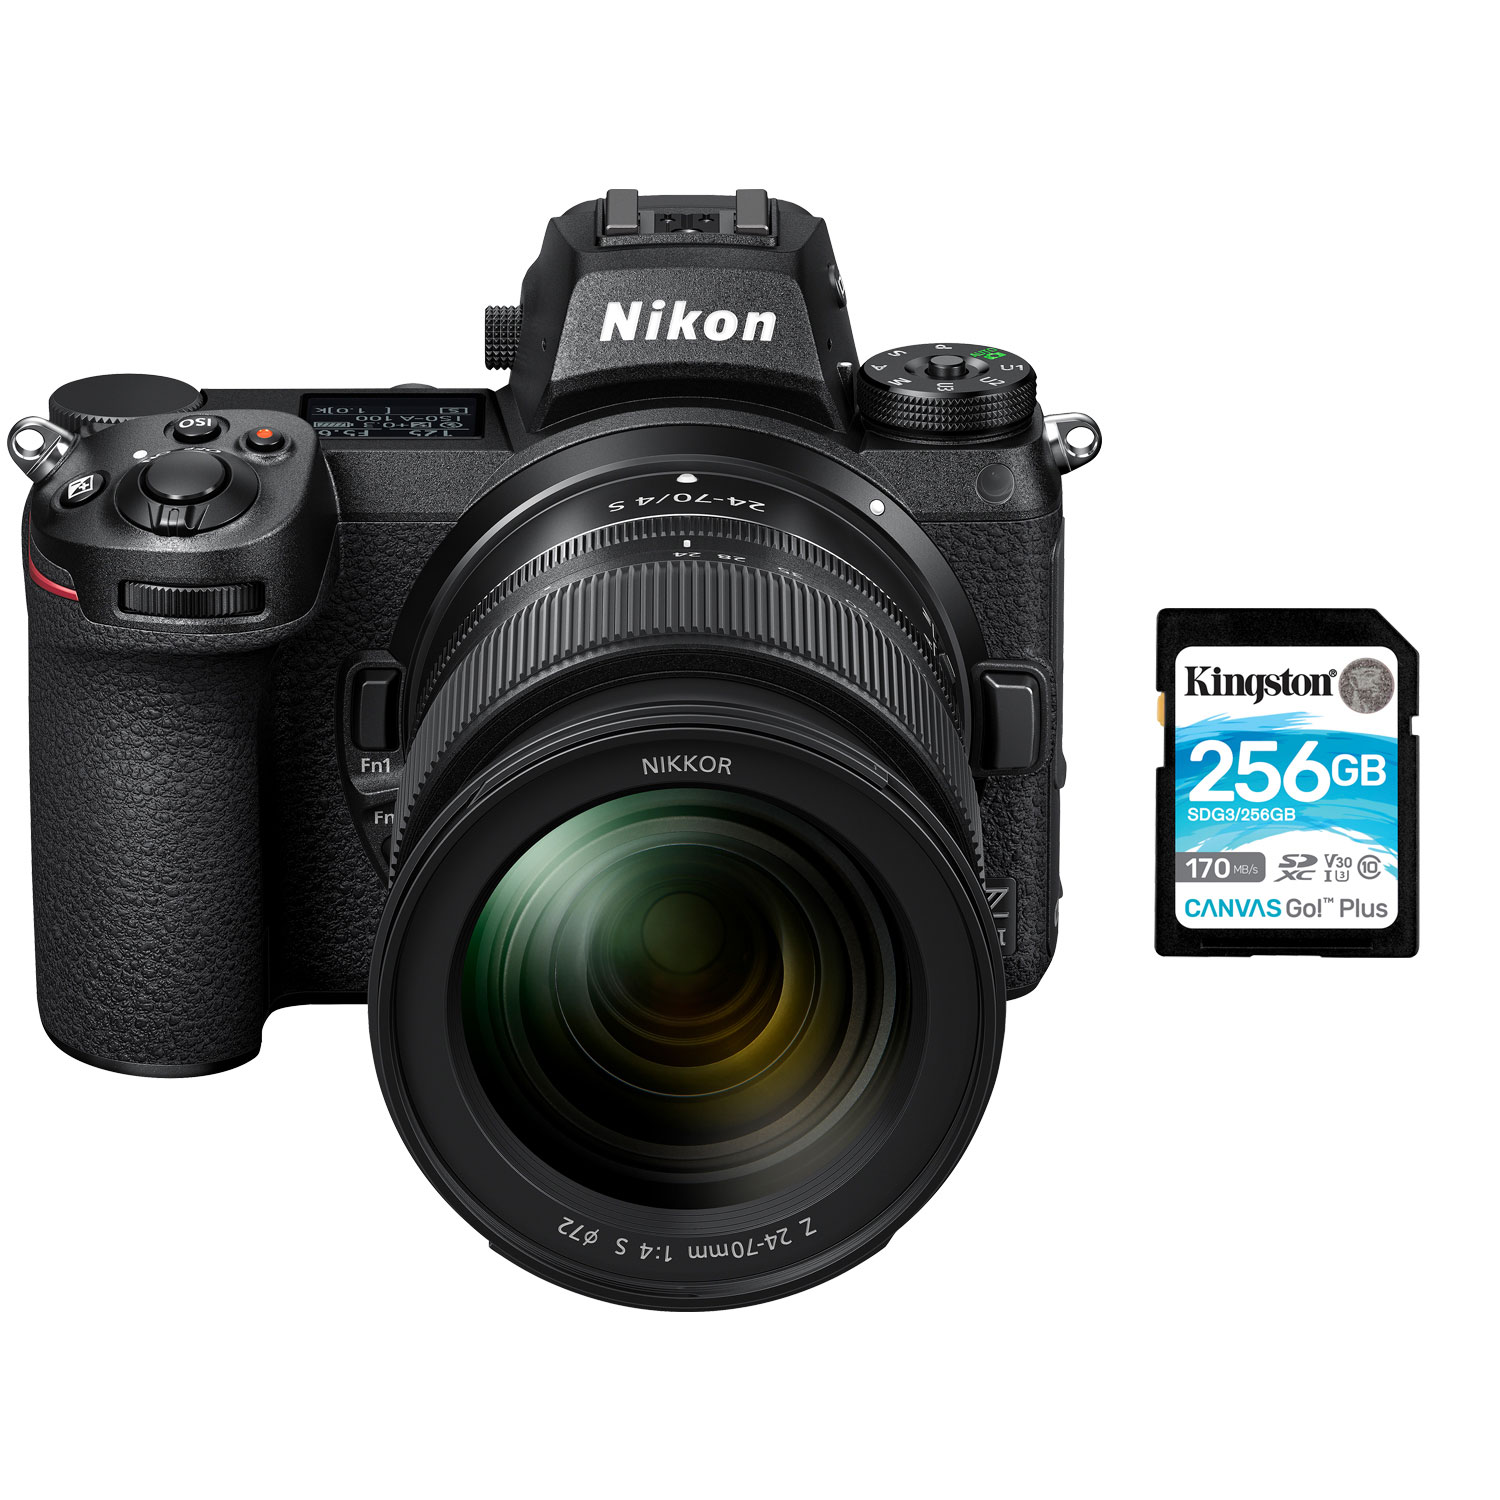 Nikon Z 5 Full-Frame Mirrorless Camera (Body Only) with 256GB Memory Card